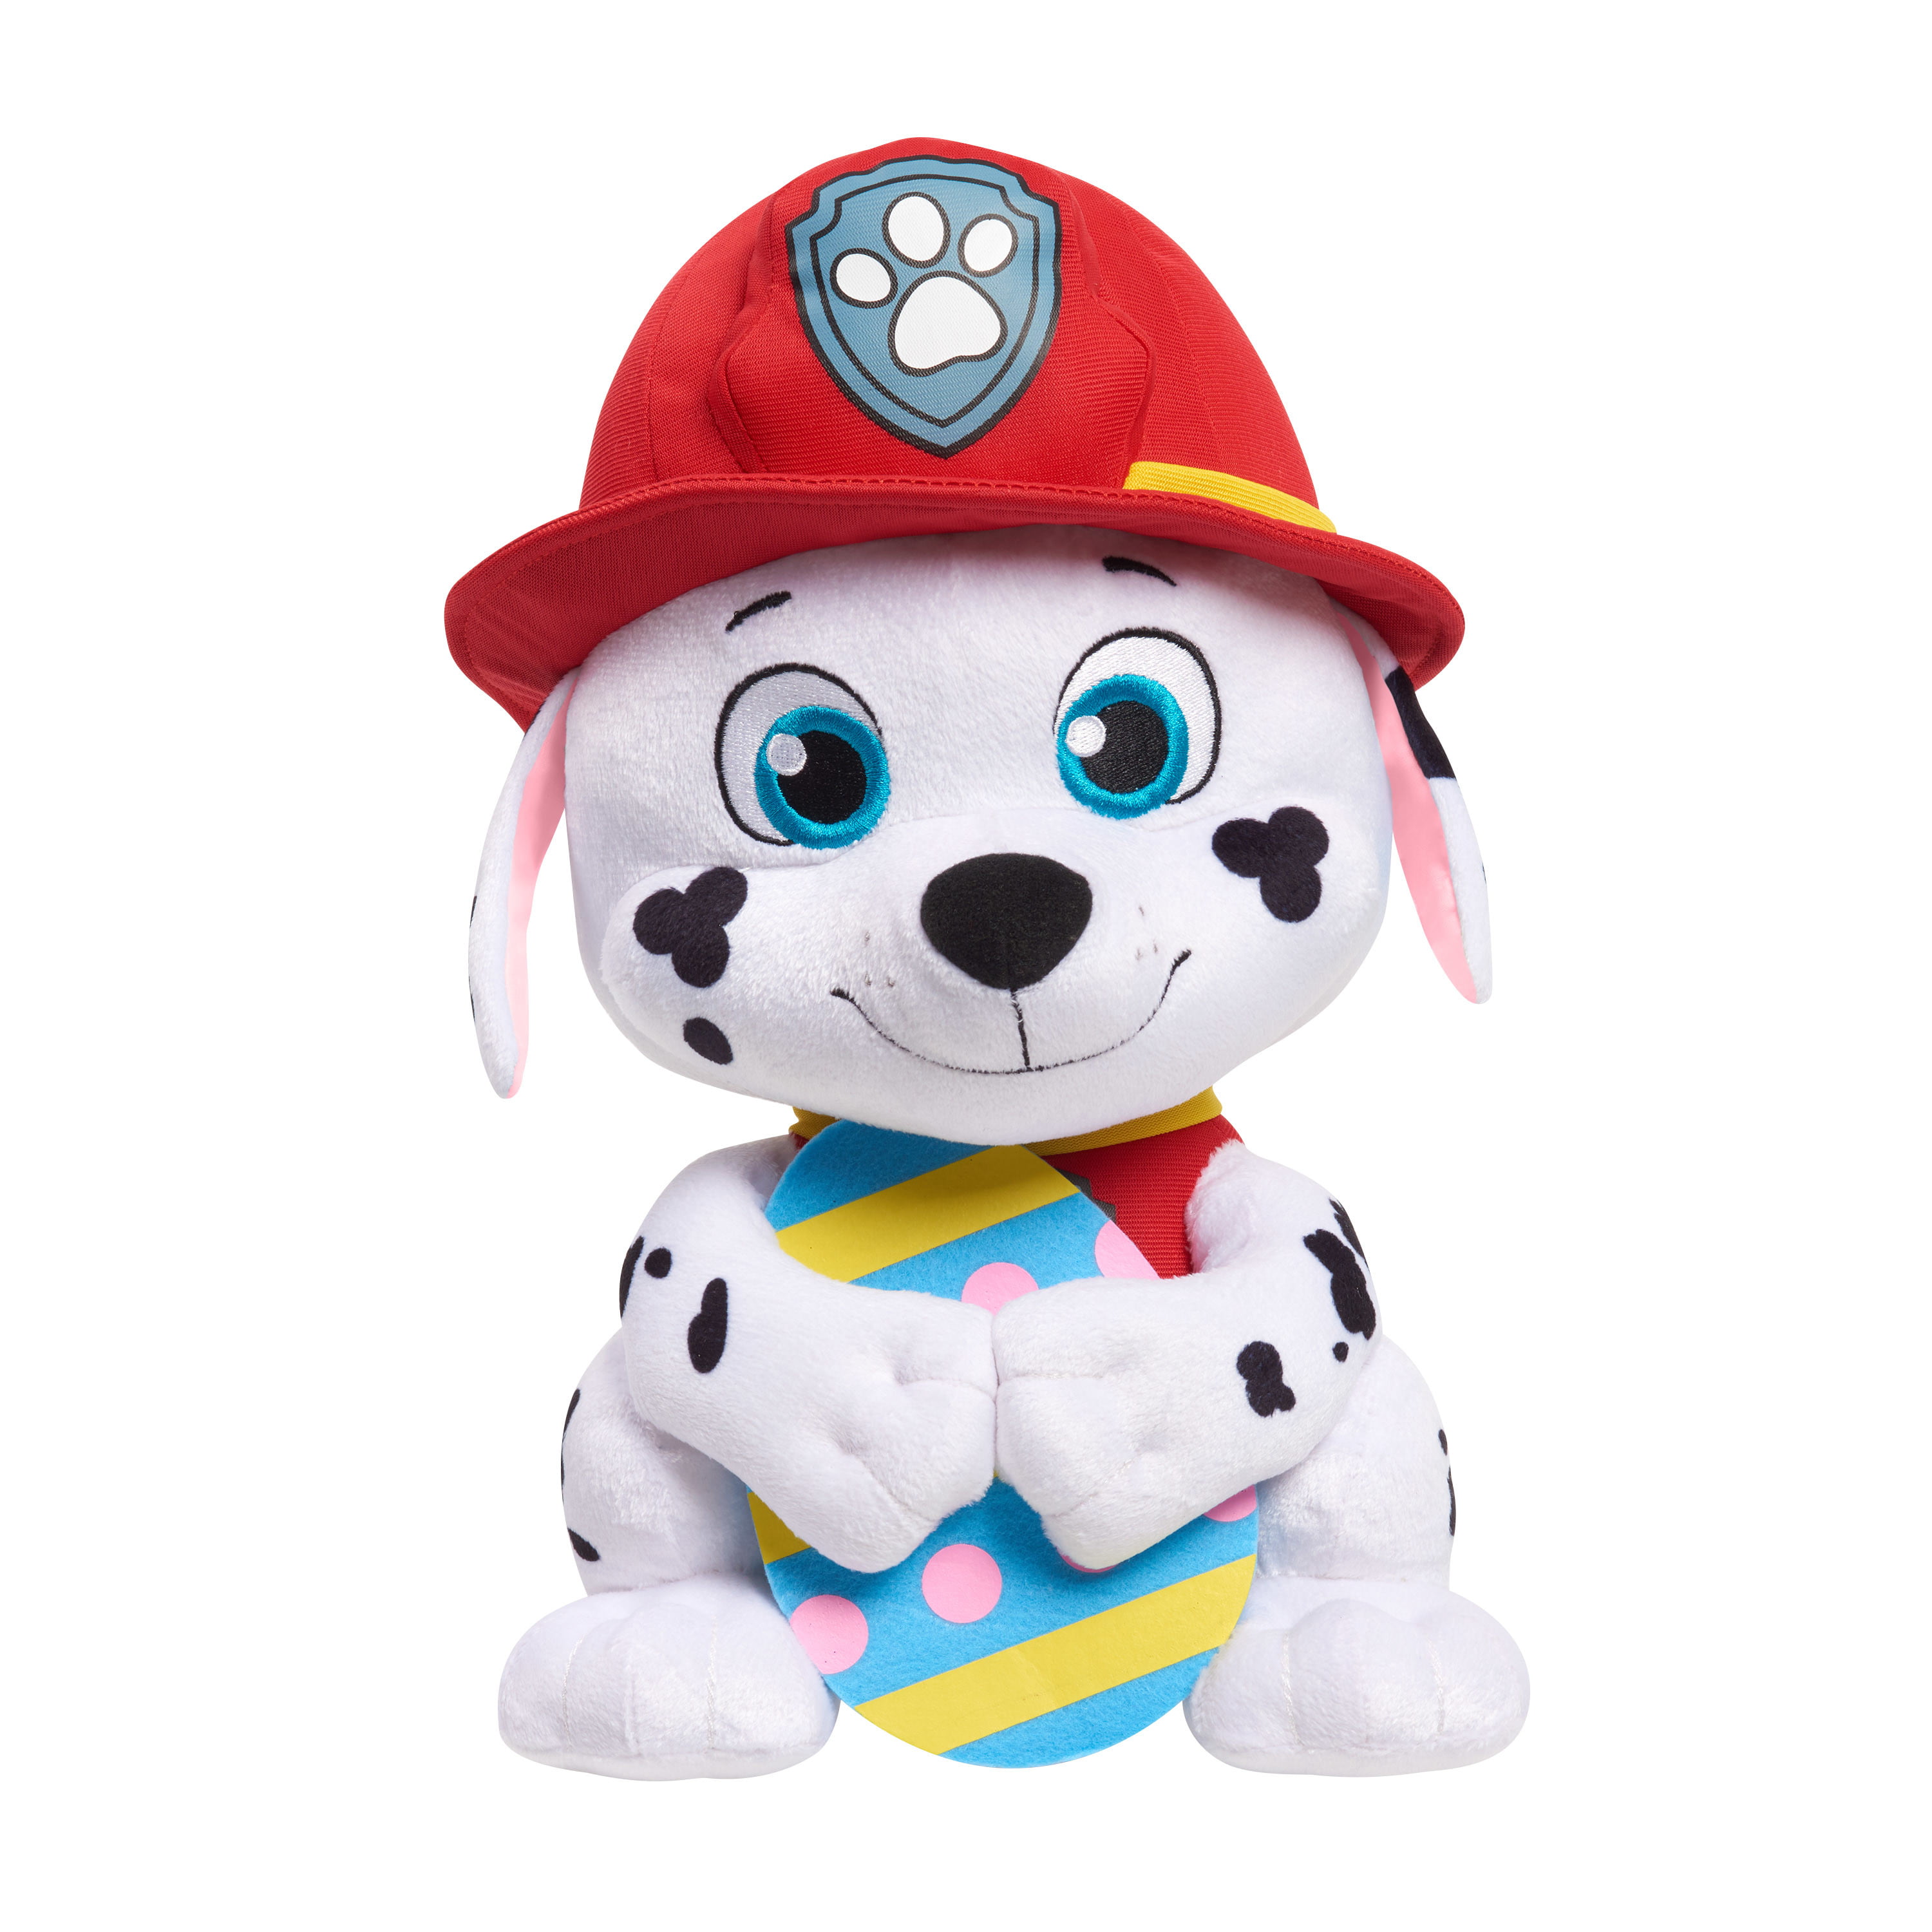 build Potentiel aIDS PAW Patrol, Easter Marshall, 12.5-Inch Large Plush , Season Plush Basic,  Ages 3 Up, by Just Play - Walmart.com